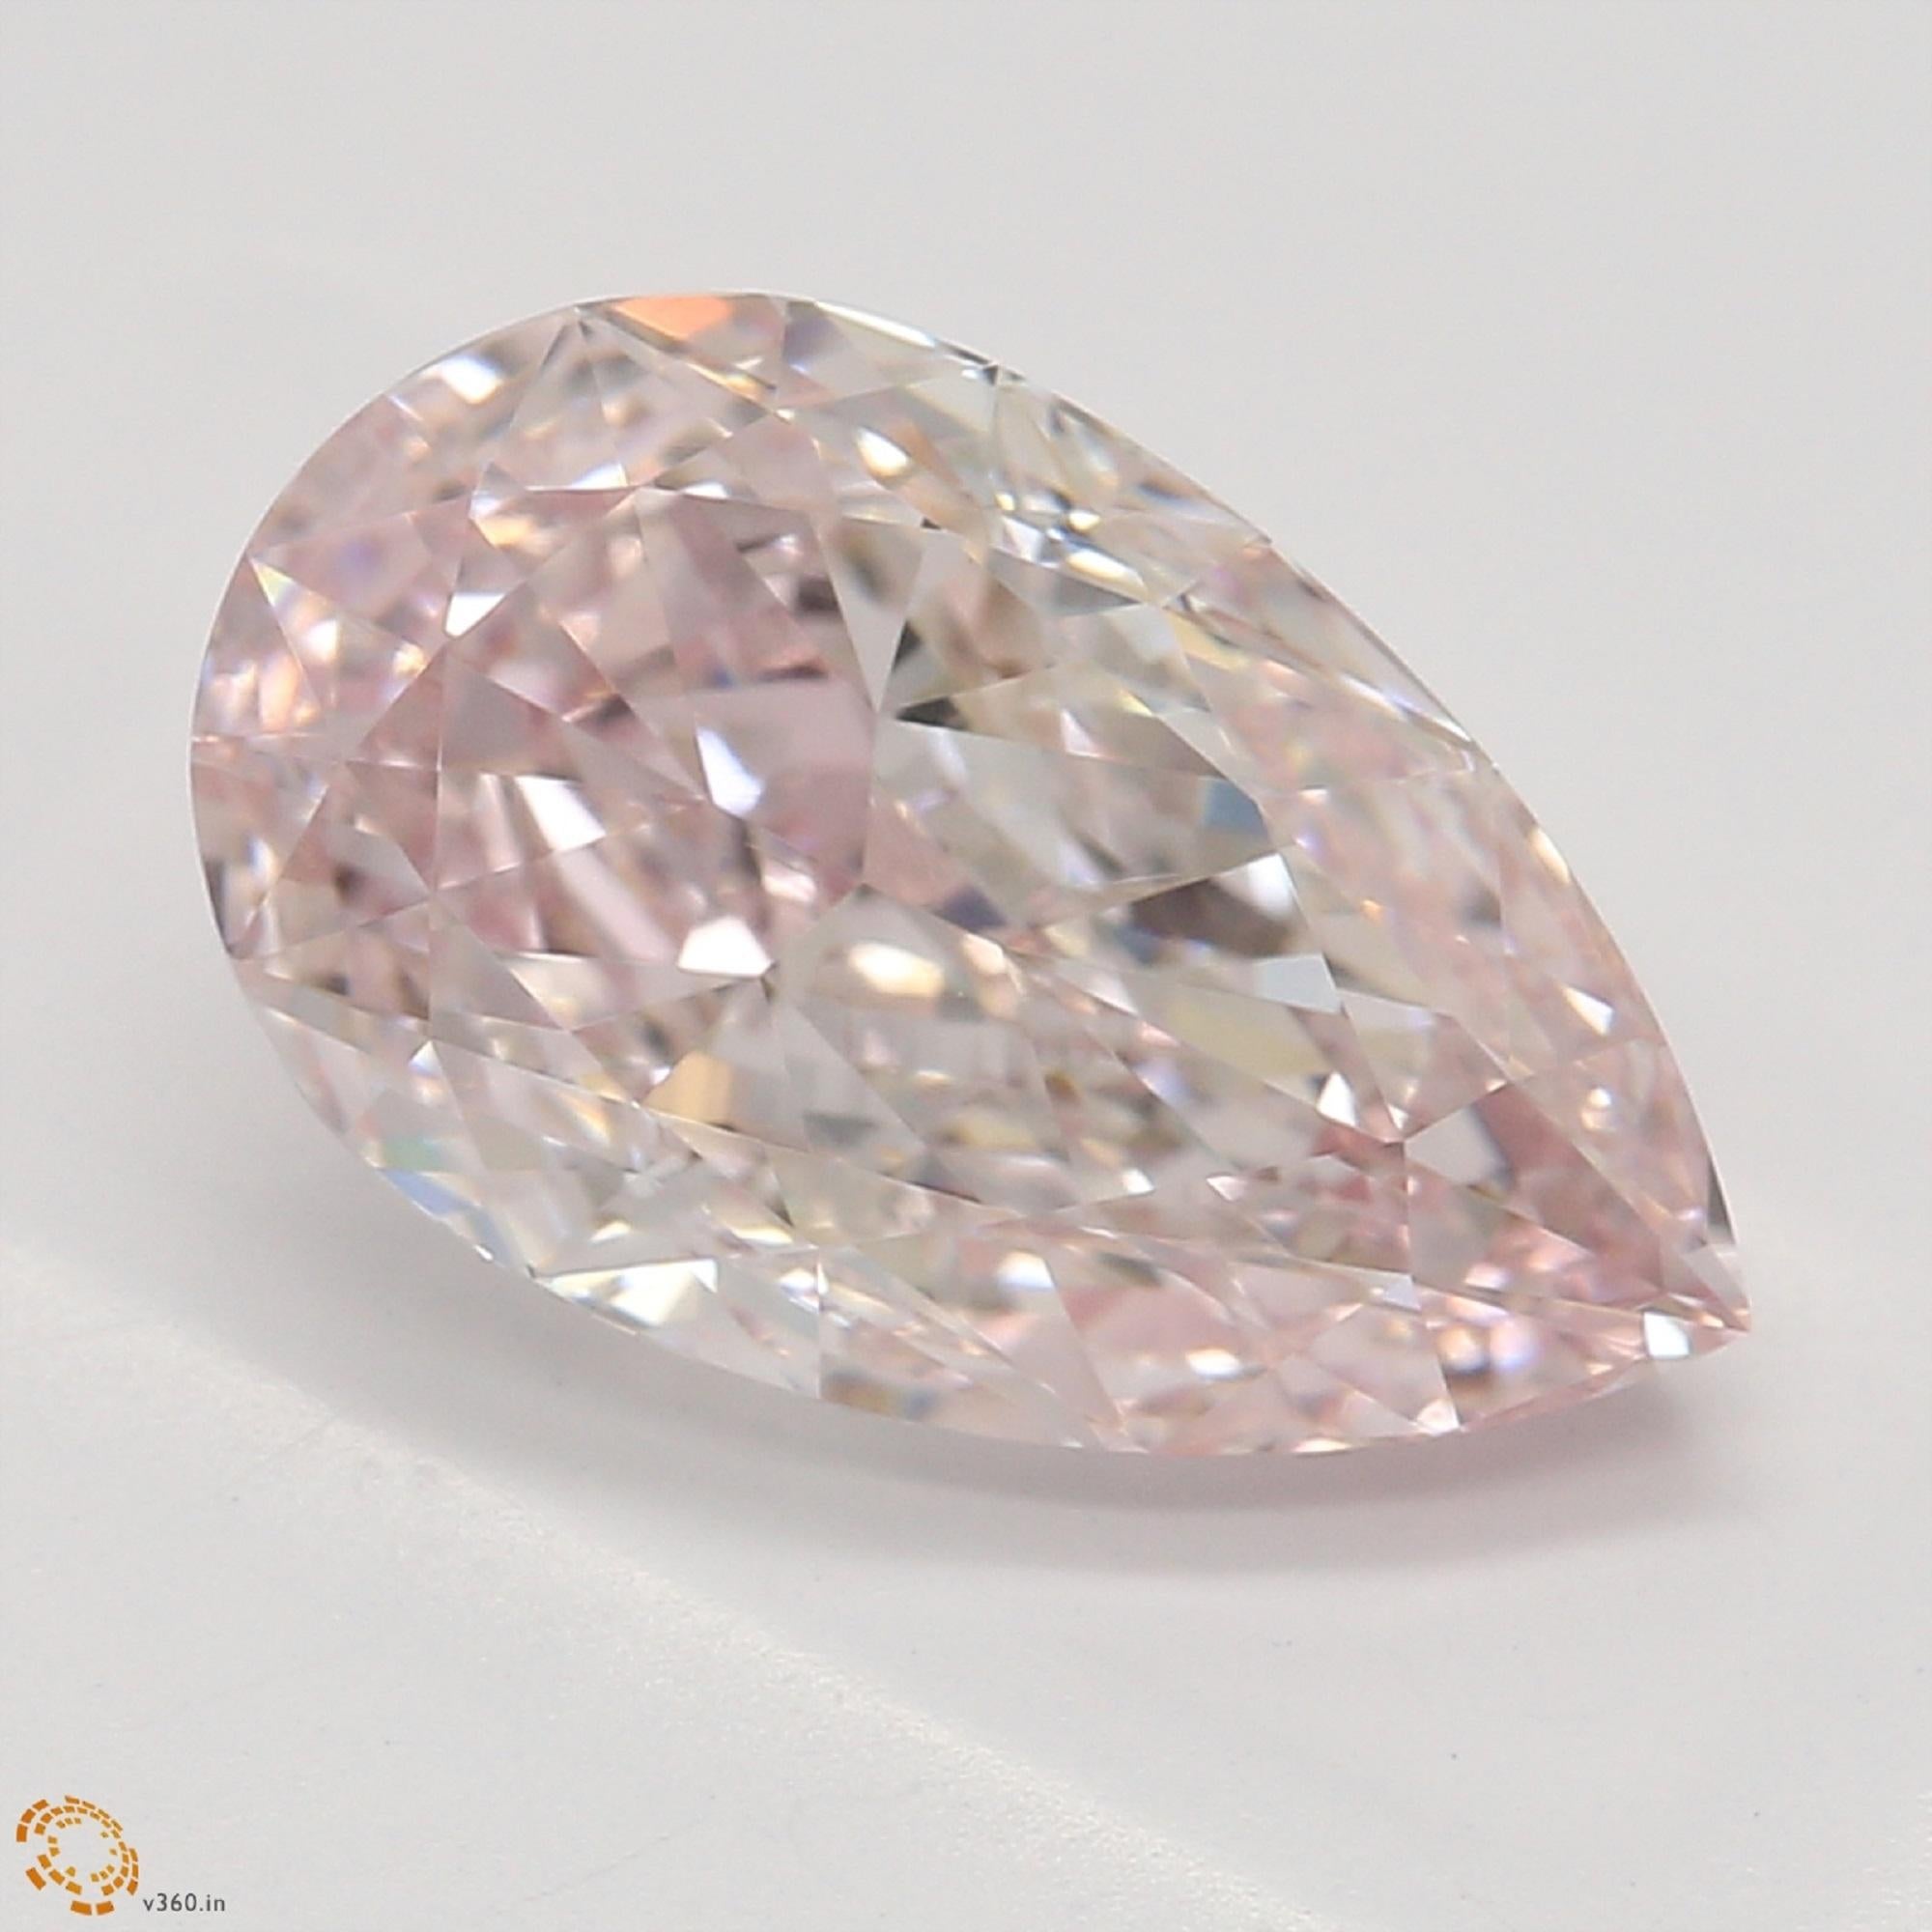 Antinori Fine Jewels is proud to offer this extremely exclusive stone considering is so rare!

The color is even pink without any subtones that diminish the value of an even pink color

The diamond has internally flawless clarity which is extremely